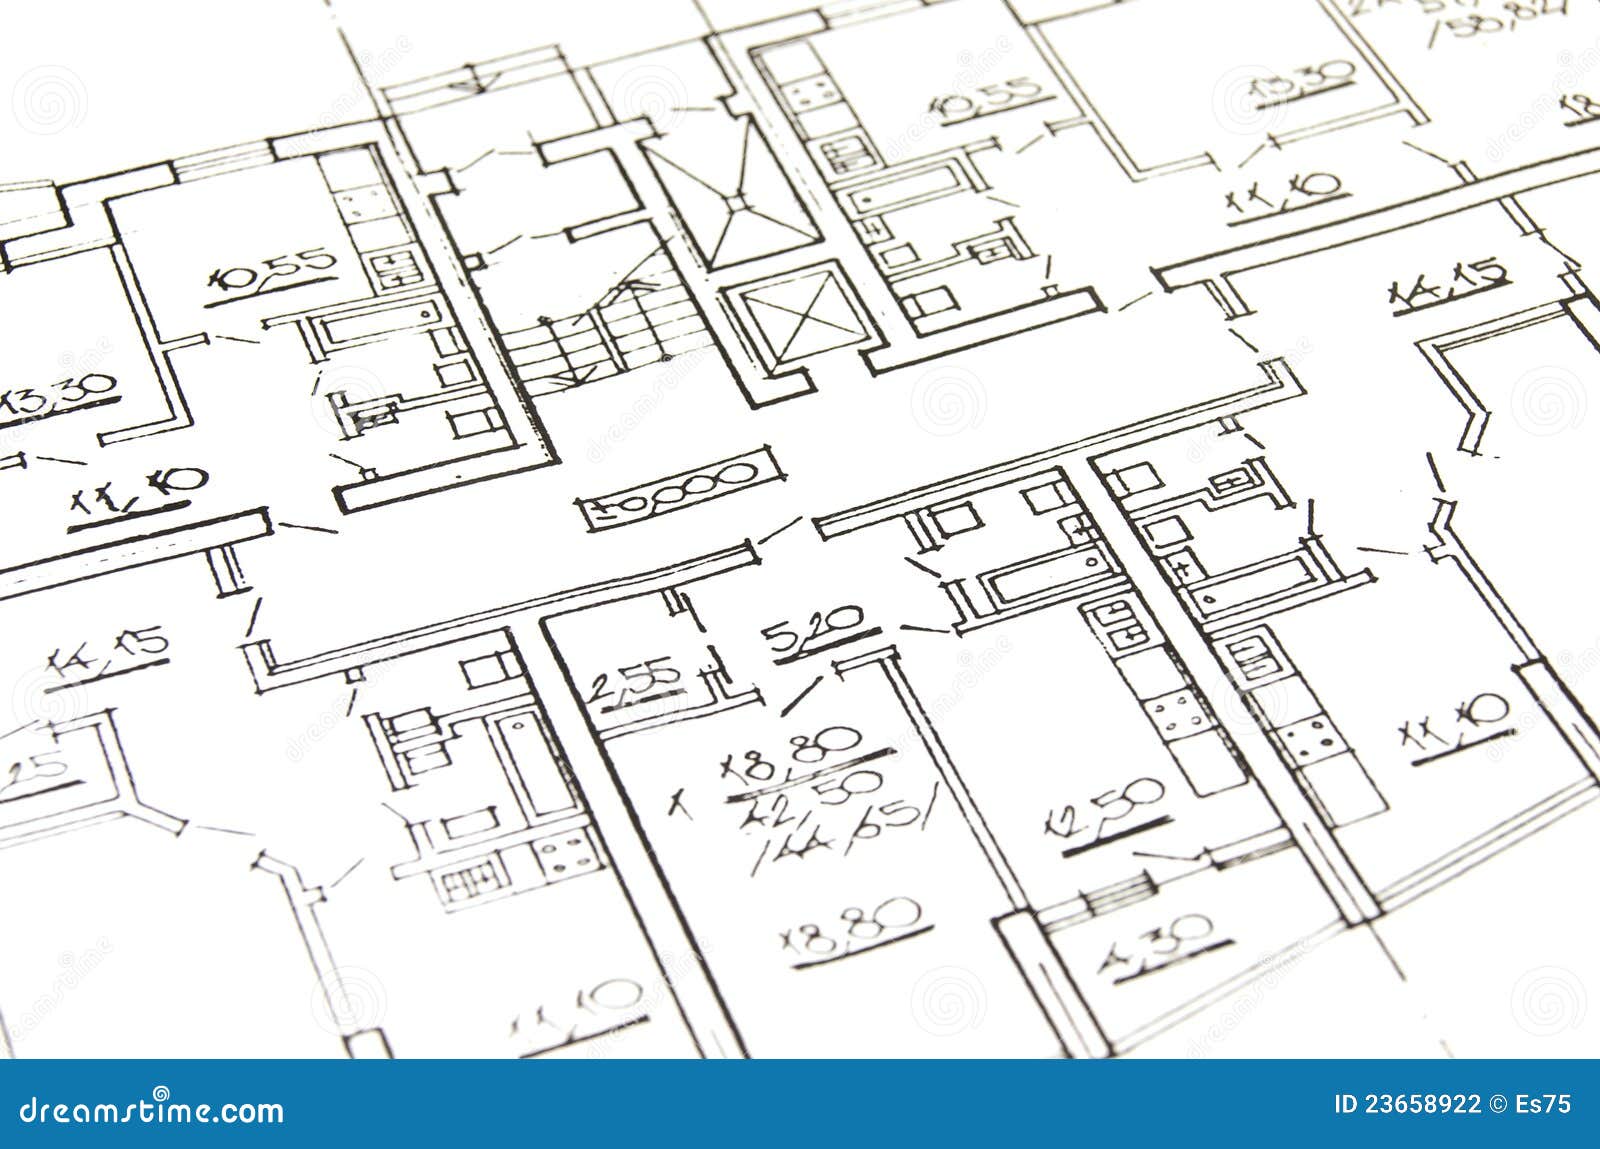  House  plan  stock photo Image of architectural drawing  